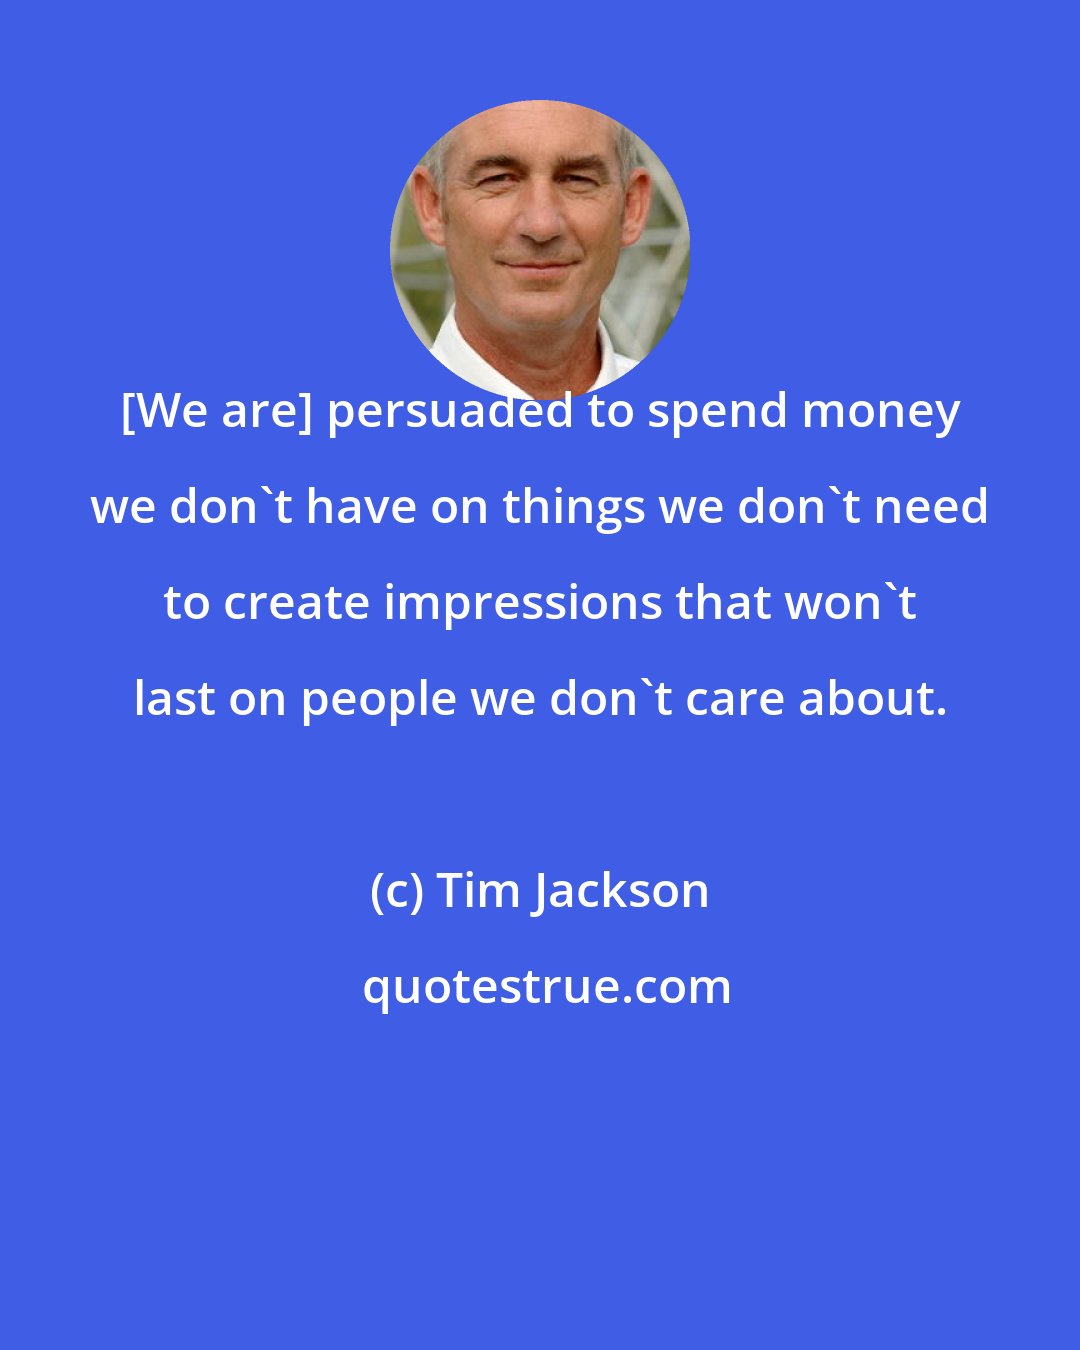 Tim Jackson: [We are] persuaded to spend money we don't have on things we don't need to create impressions that won't last on people we don't care about.